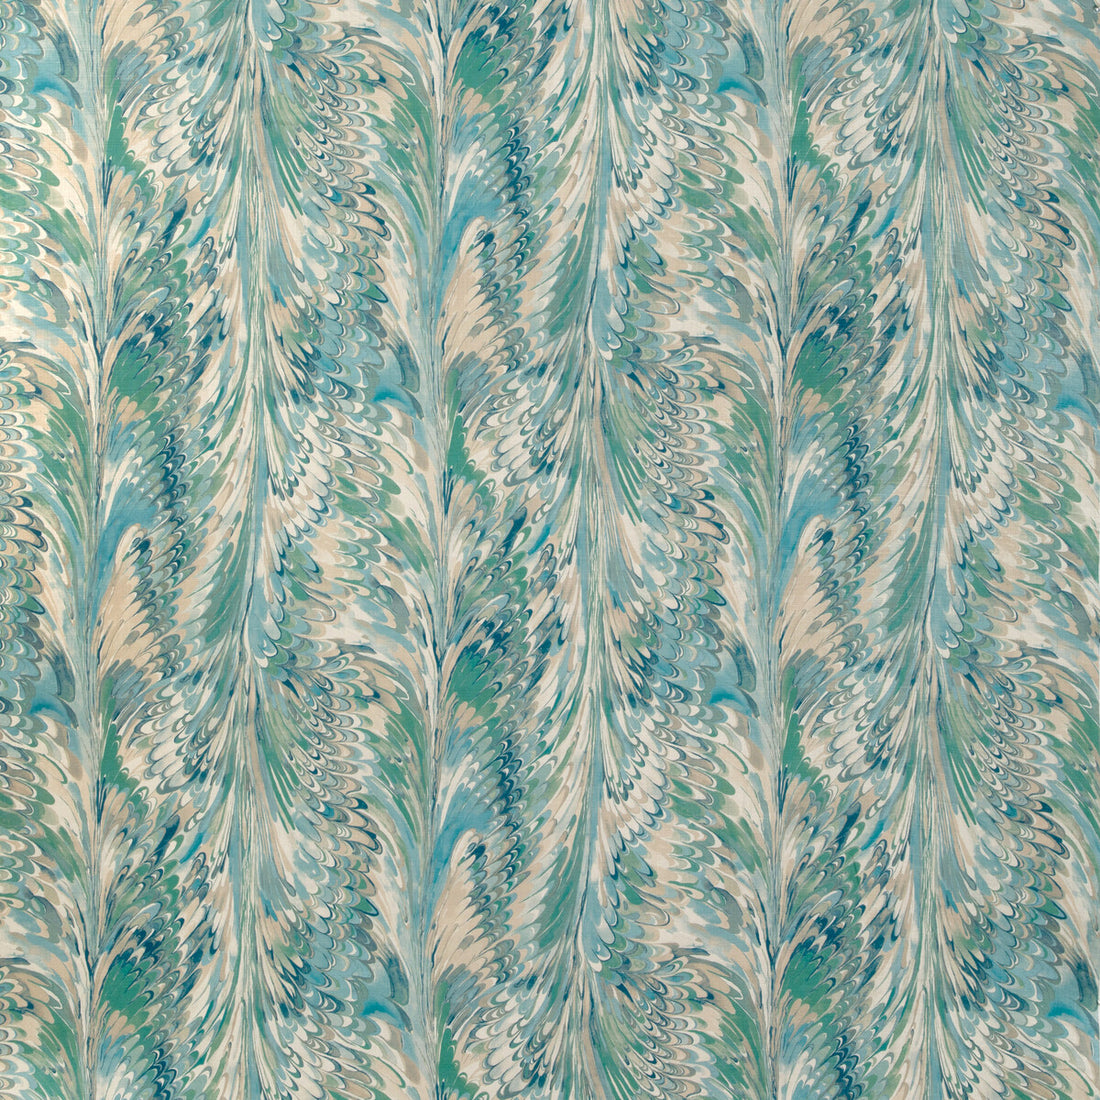 Taplow Print fabric in marine/sand color - pattern 2019114.516.0 - by Lee Jofa in the Garden Walk collection